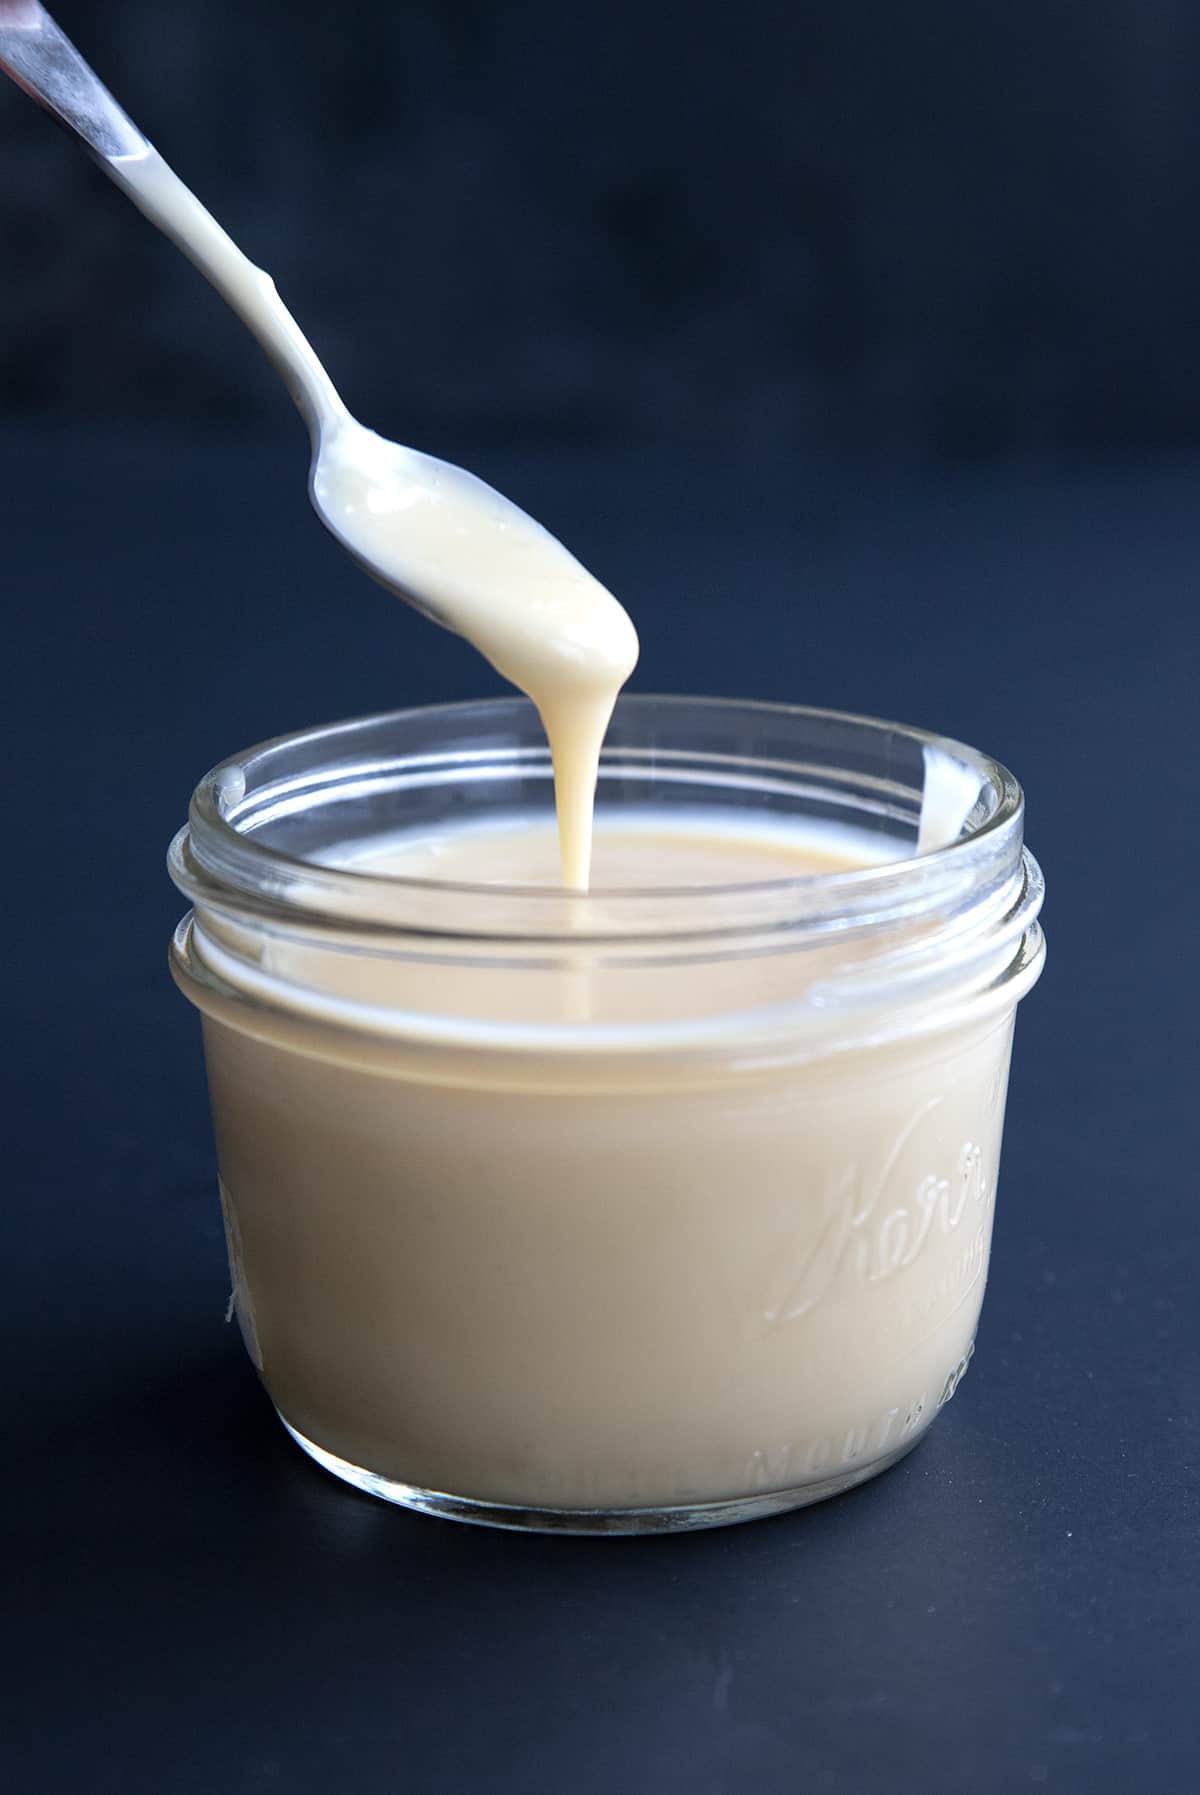 A spoon digging into a jar of Keto Sweetened Condensed Milk.